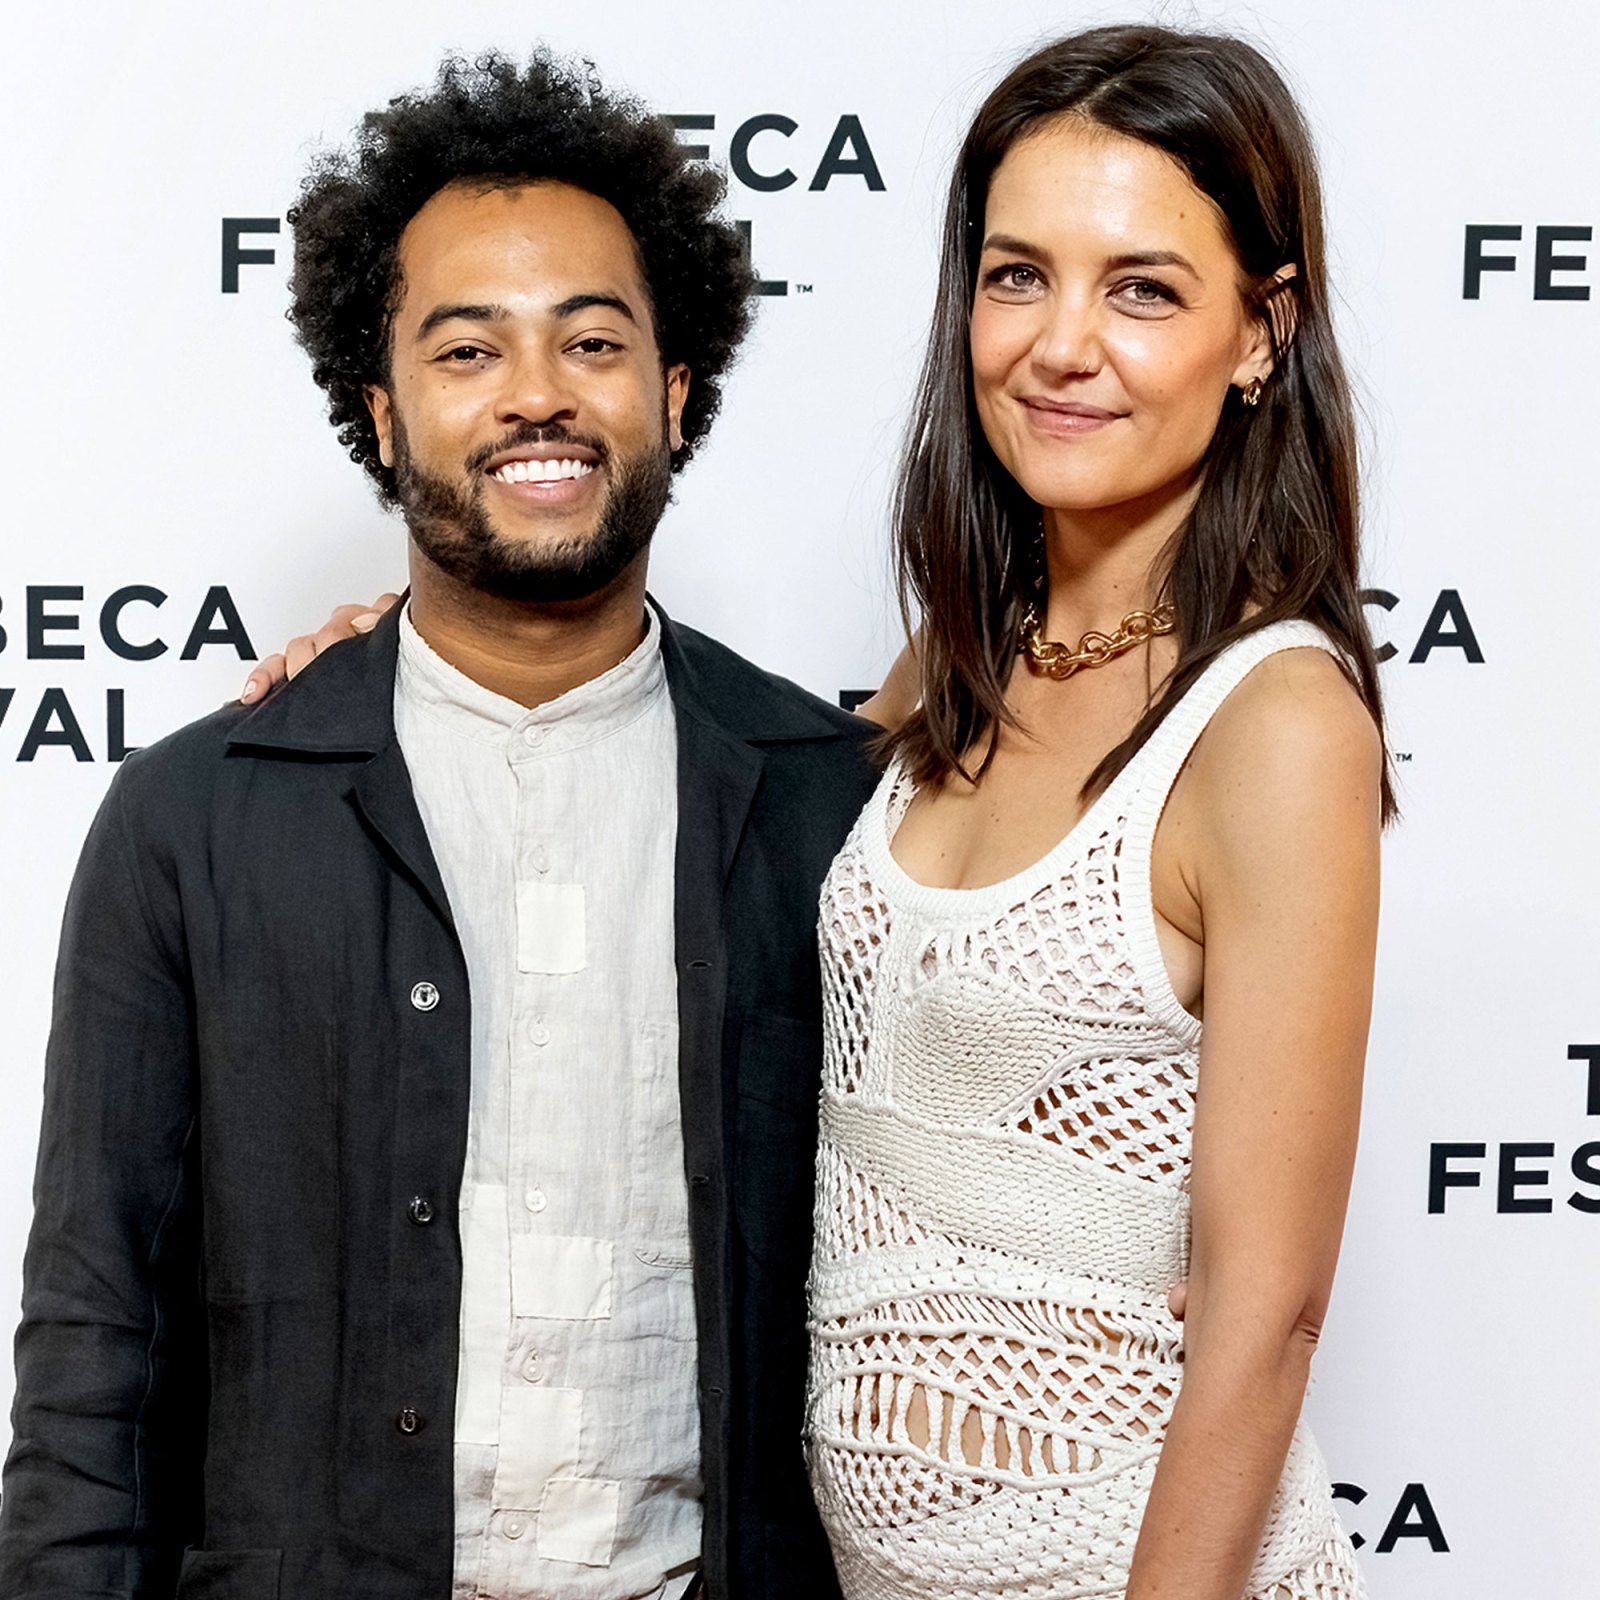 Date Night! Katie Holmes and BF Bobby Wooten Heat Up Tribeca Film Fest: Pics